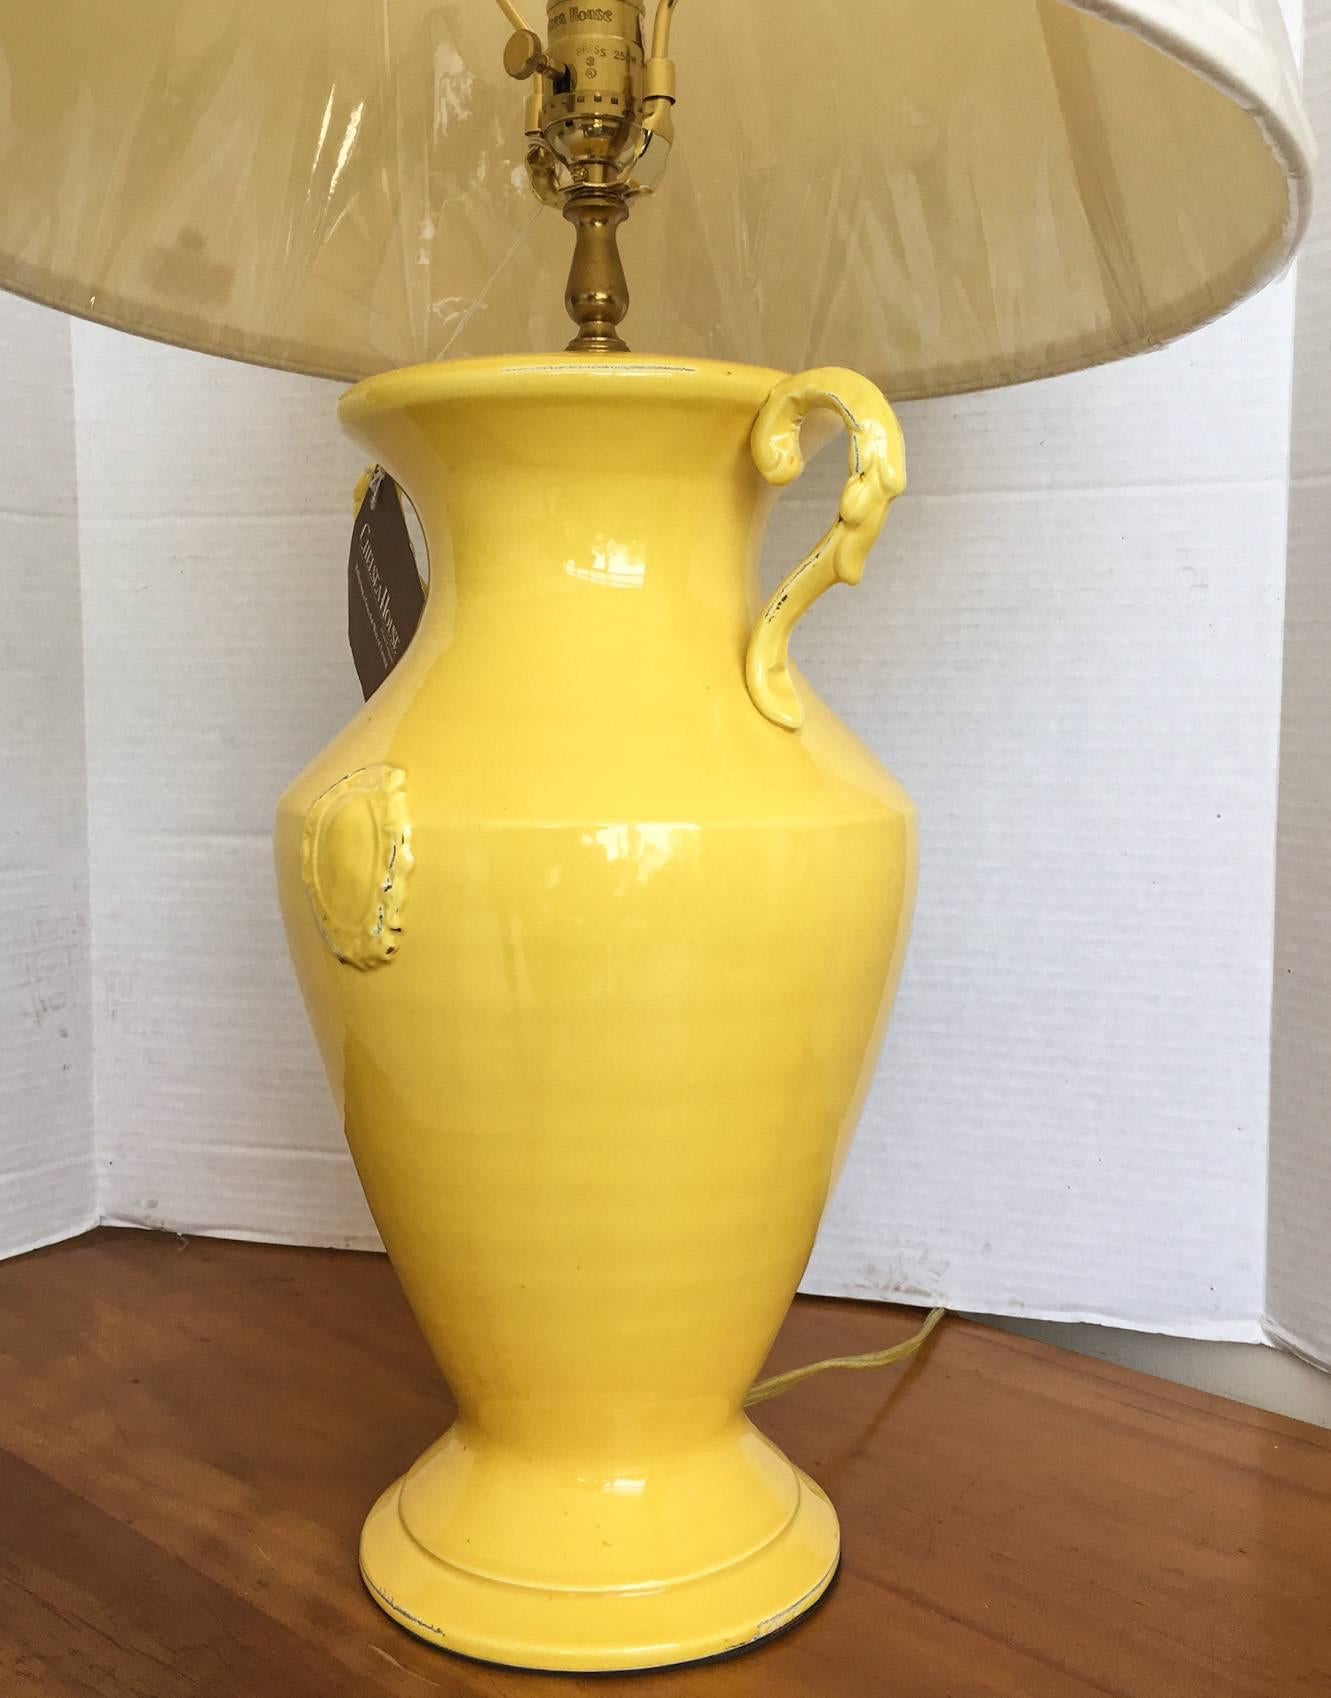 French Provincial Chelsea House Yellow Urn Lamp with Shade